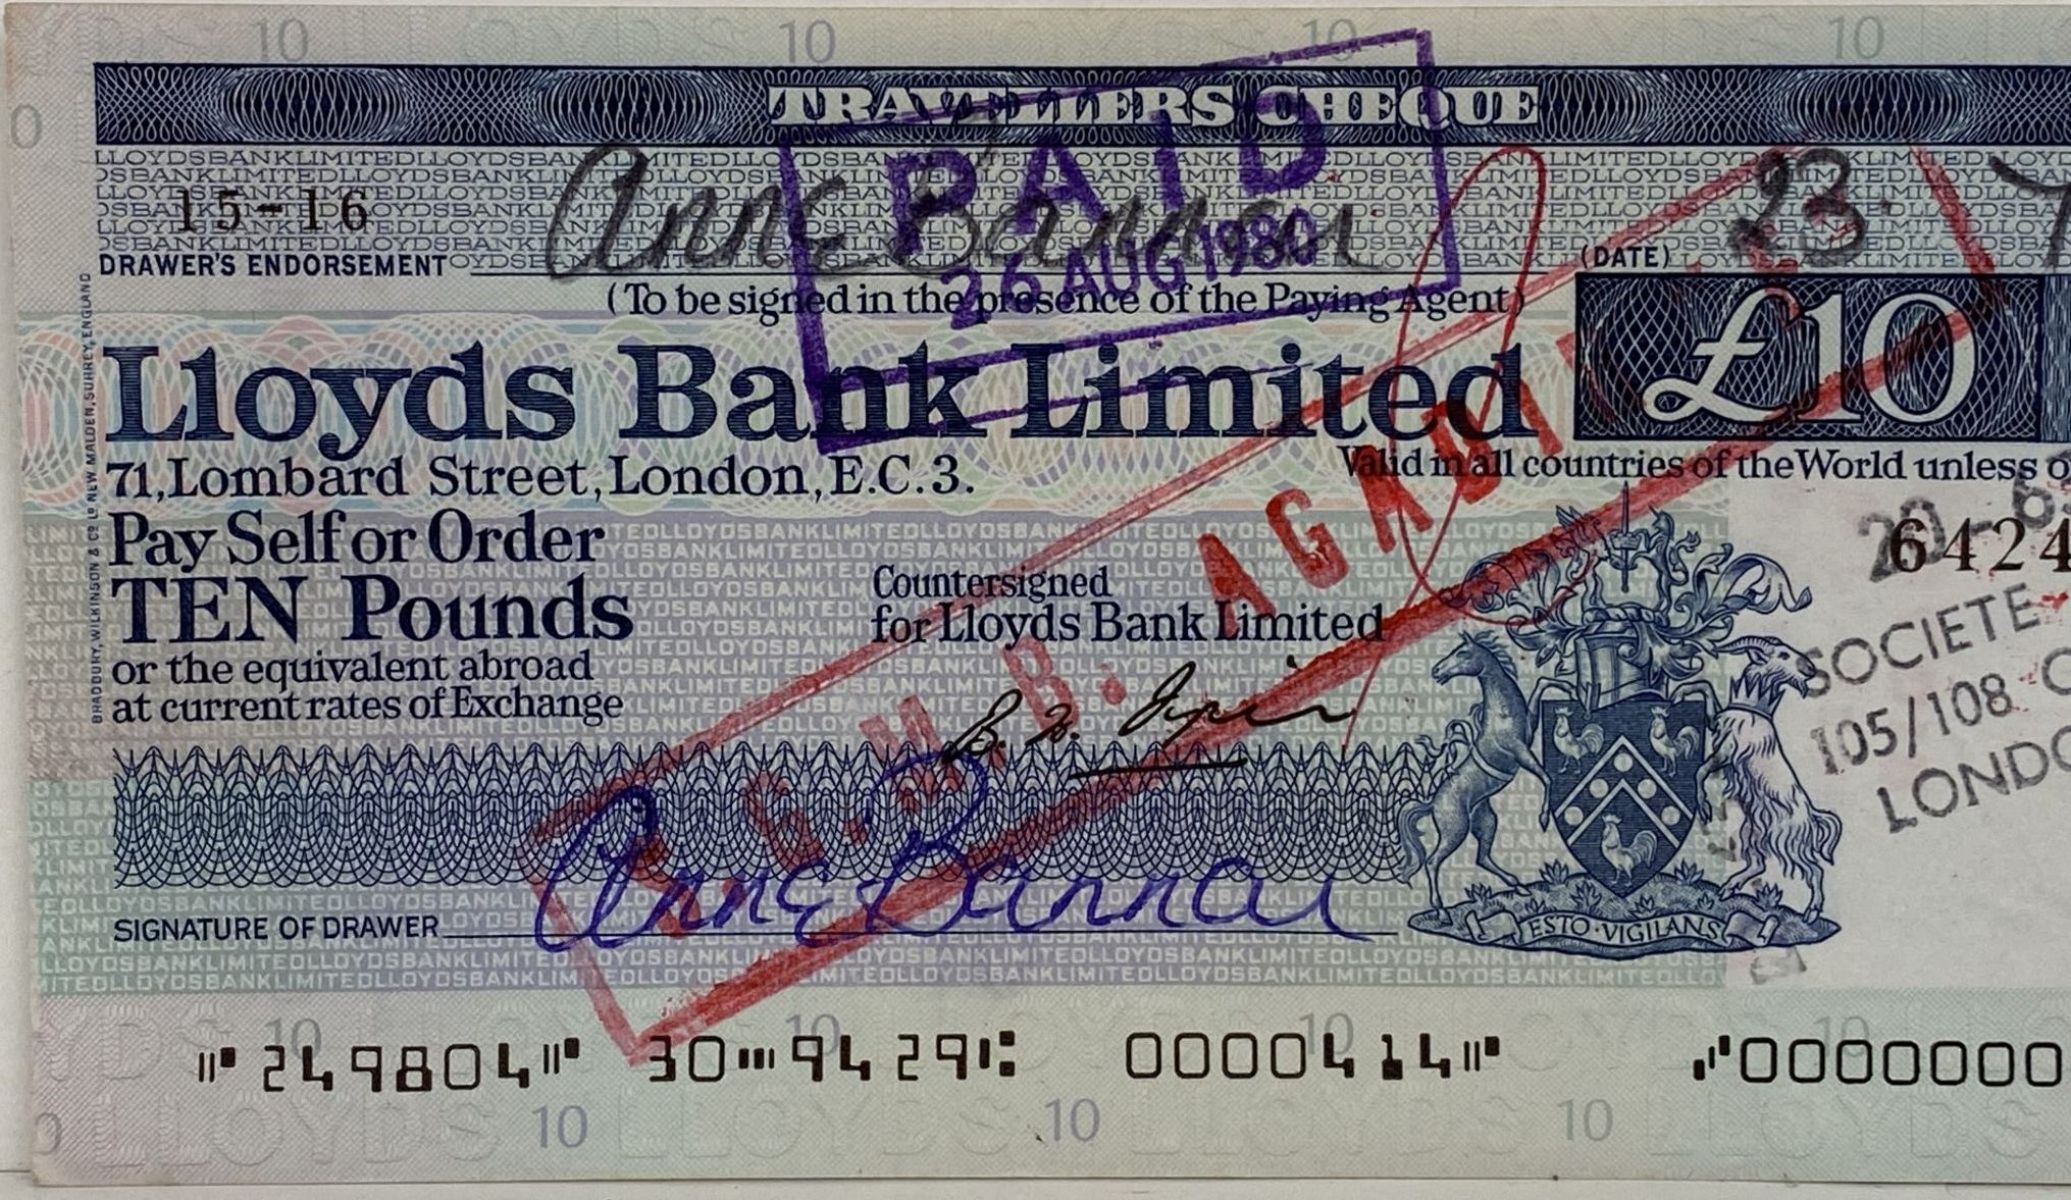 OLD BANKING MEMORABILIA: Travellers Cheque issued by Lloyds Bank, London 1980